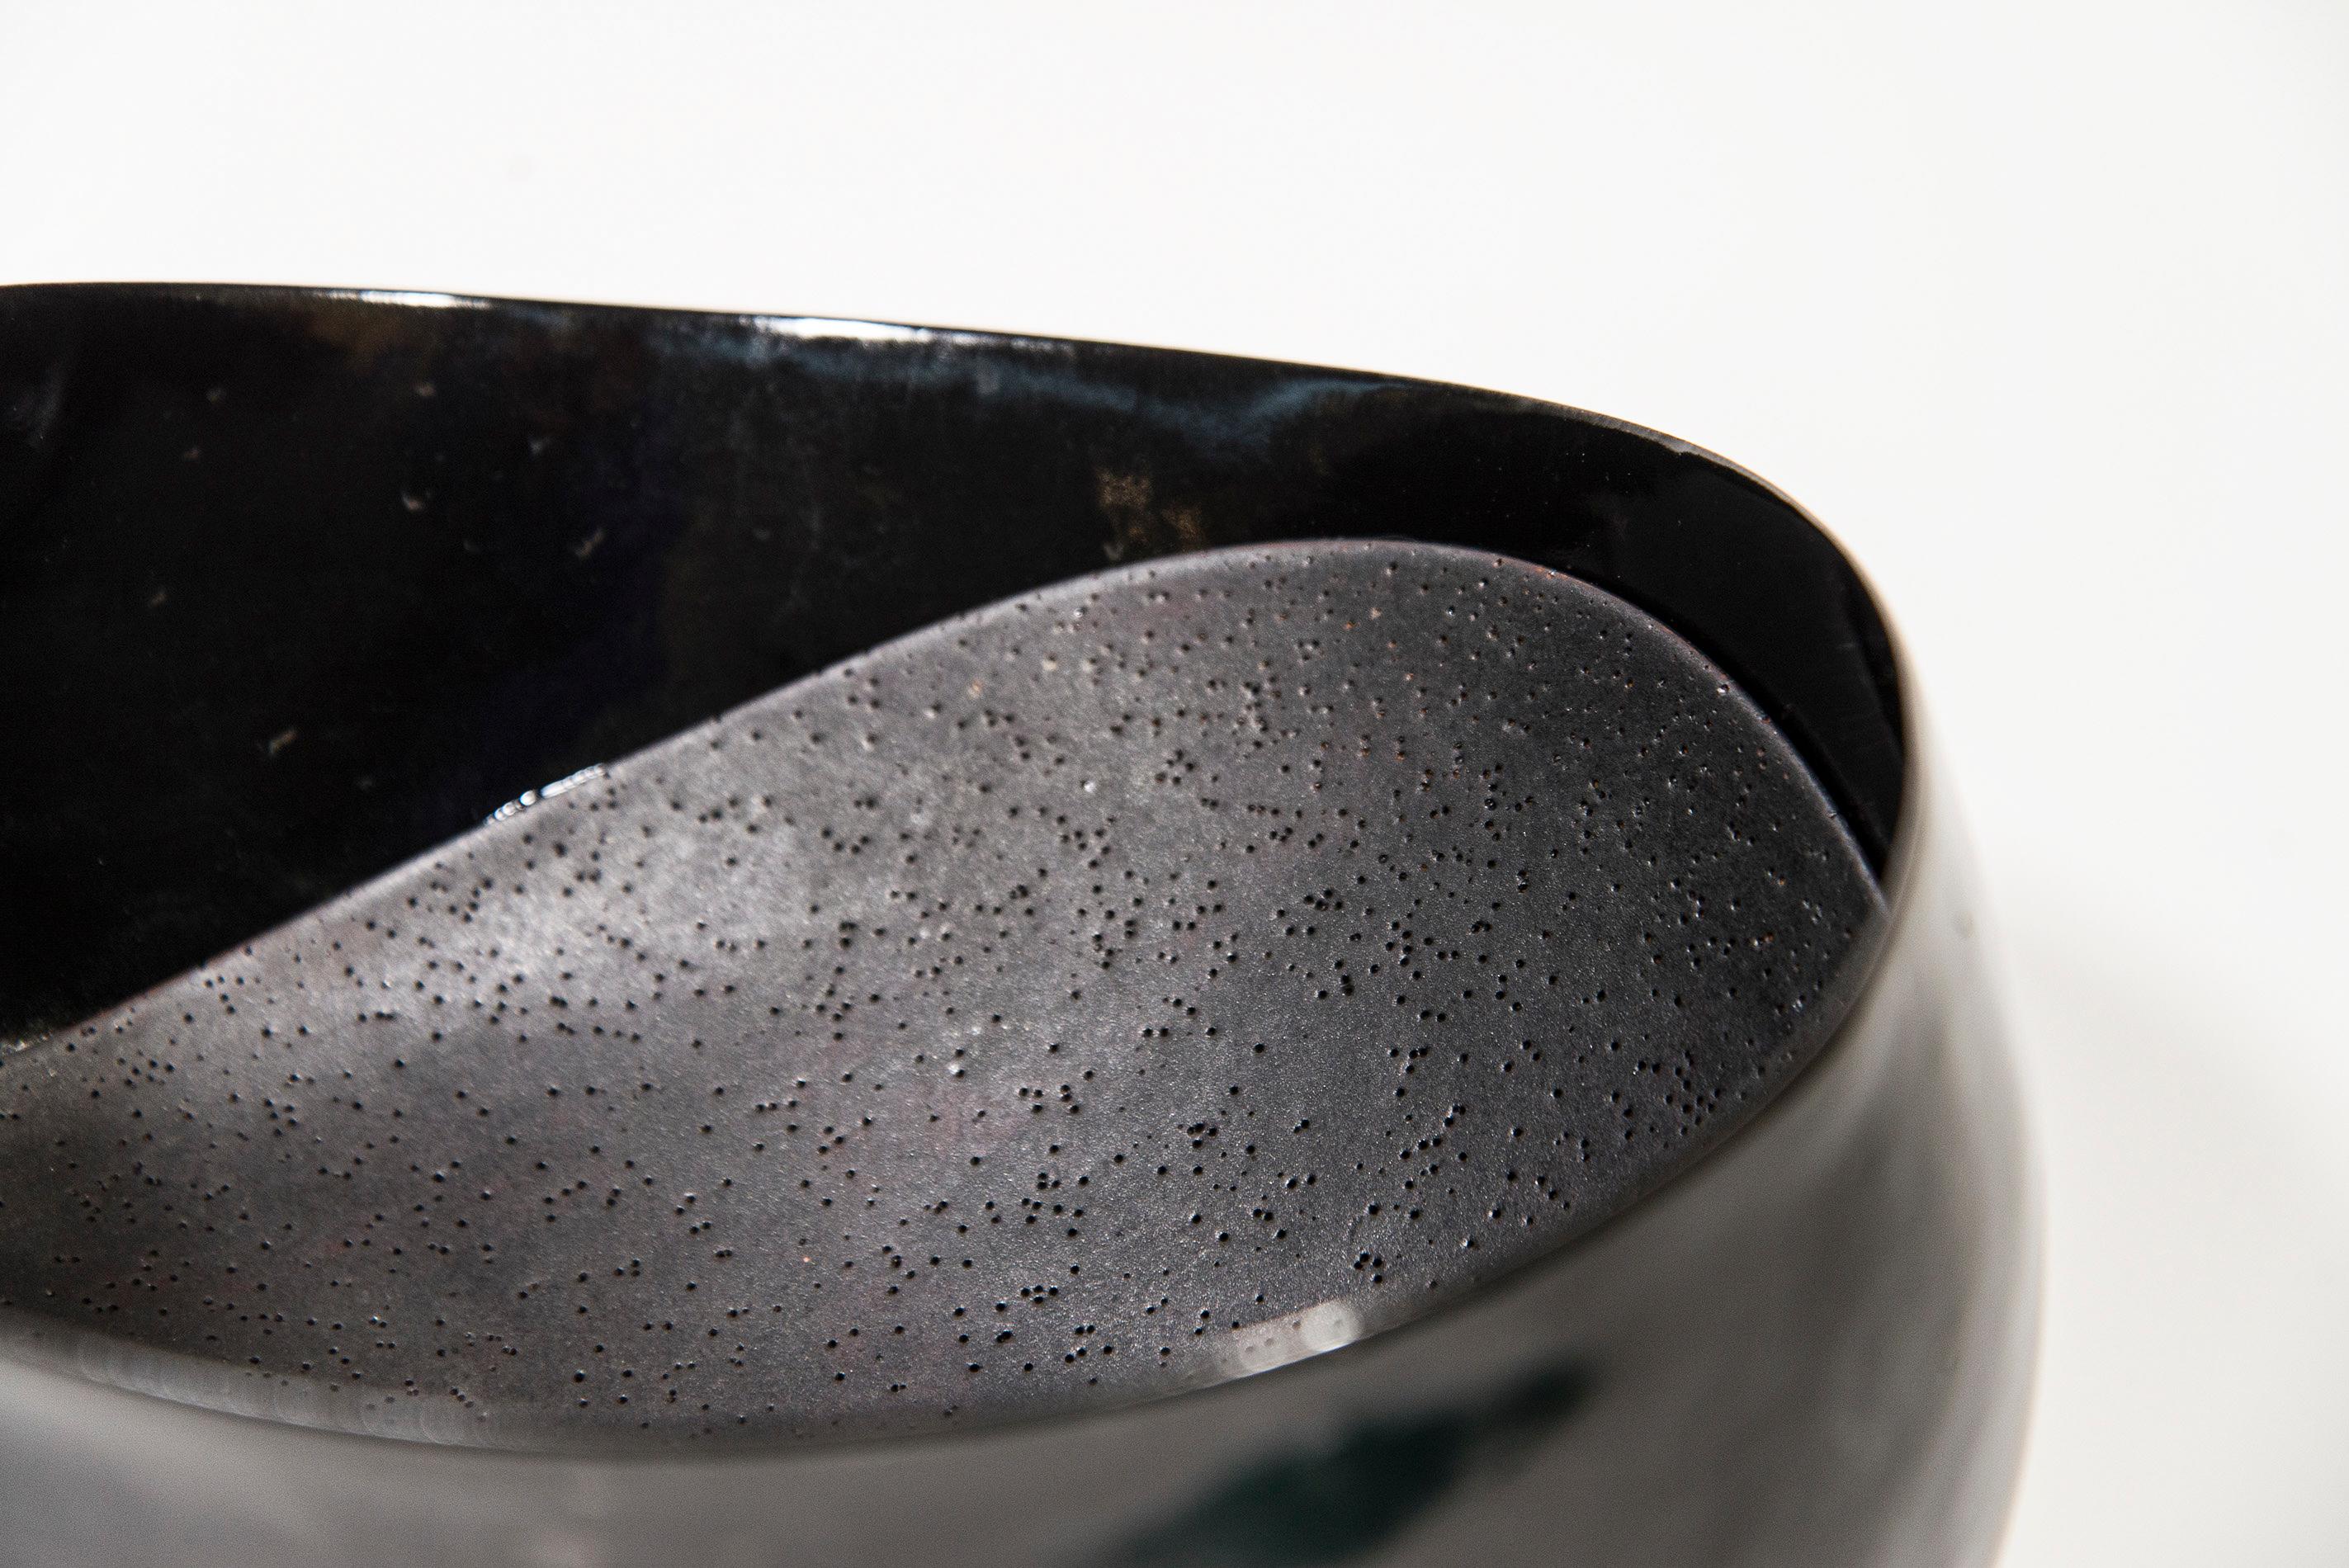 Afterlife No 4  - glossy black, grey, nature inspired, elongated, ceramic vessel - Contemporary Sculpture by Steven Heinemann